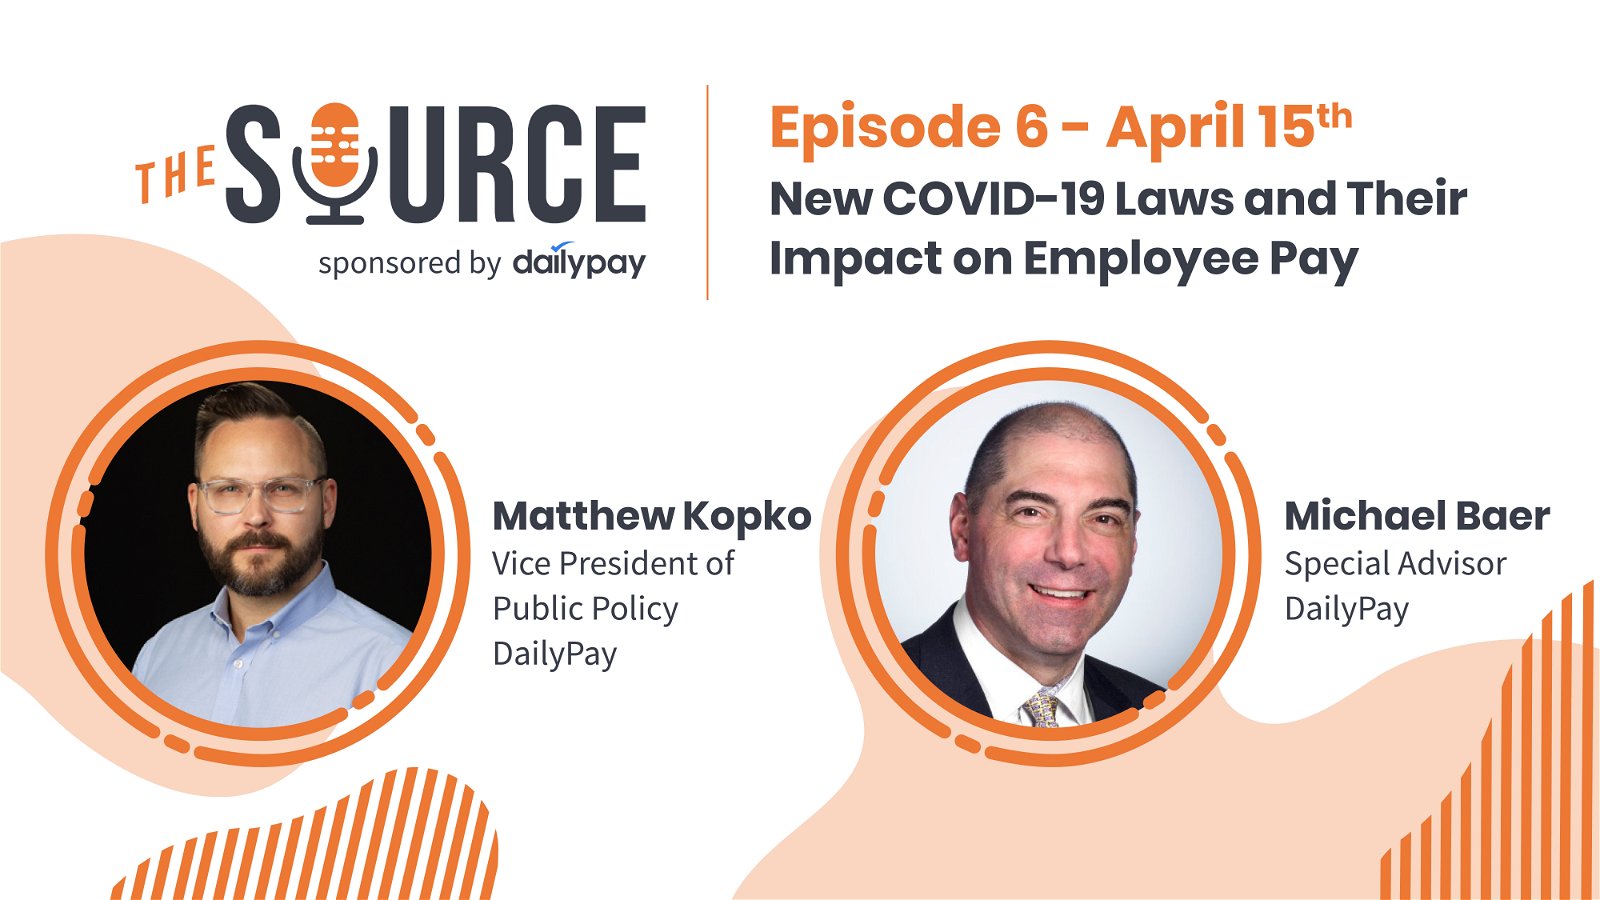 Promotional image for "The Source" podcast episode 6, featuring Matthew Kopko, VP of Public Policy, and Michael Baer, Special Advisor, discussing new COVID-19 laws and their impact on employee pay.